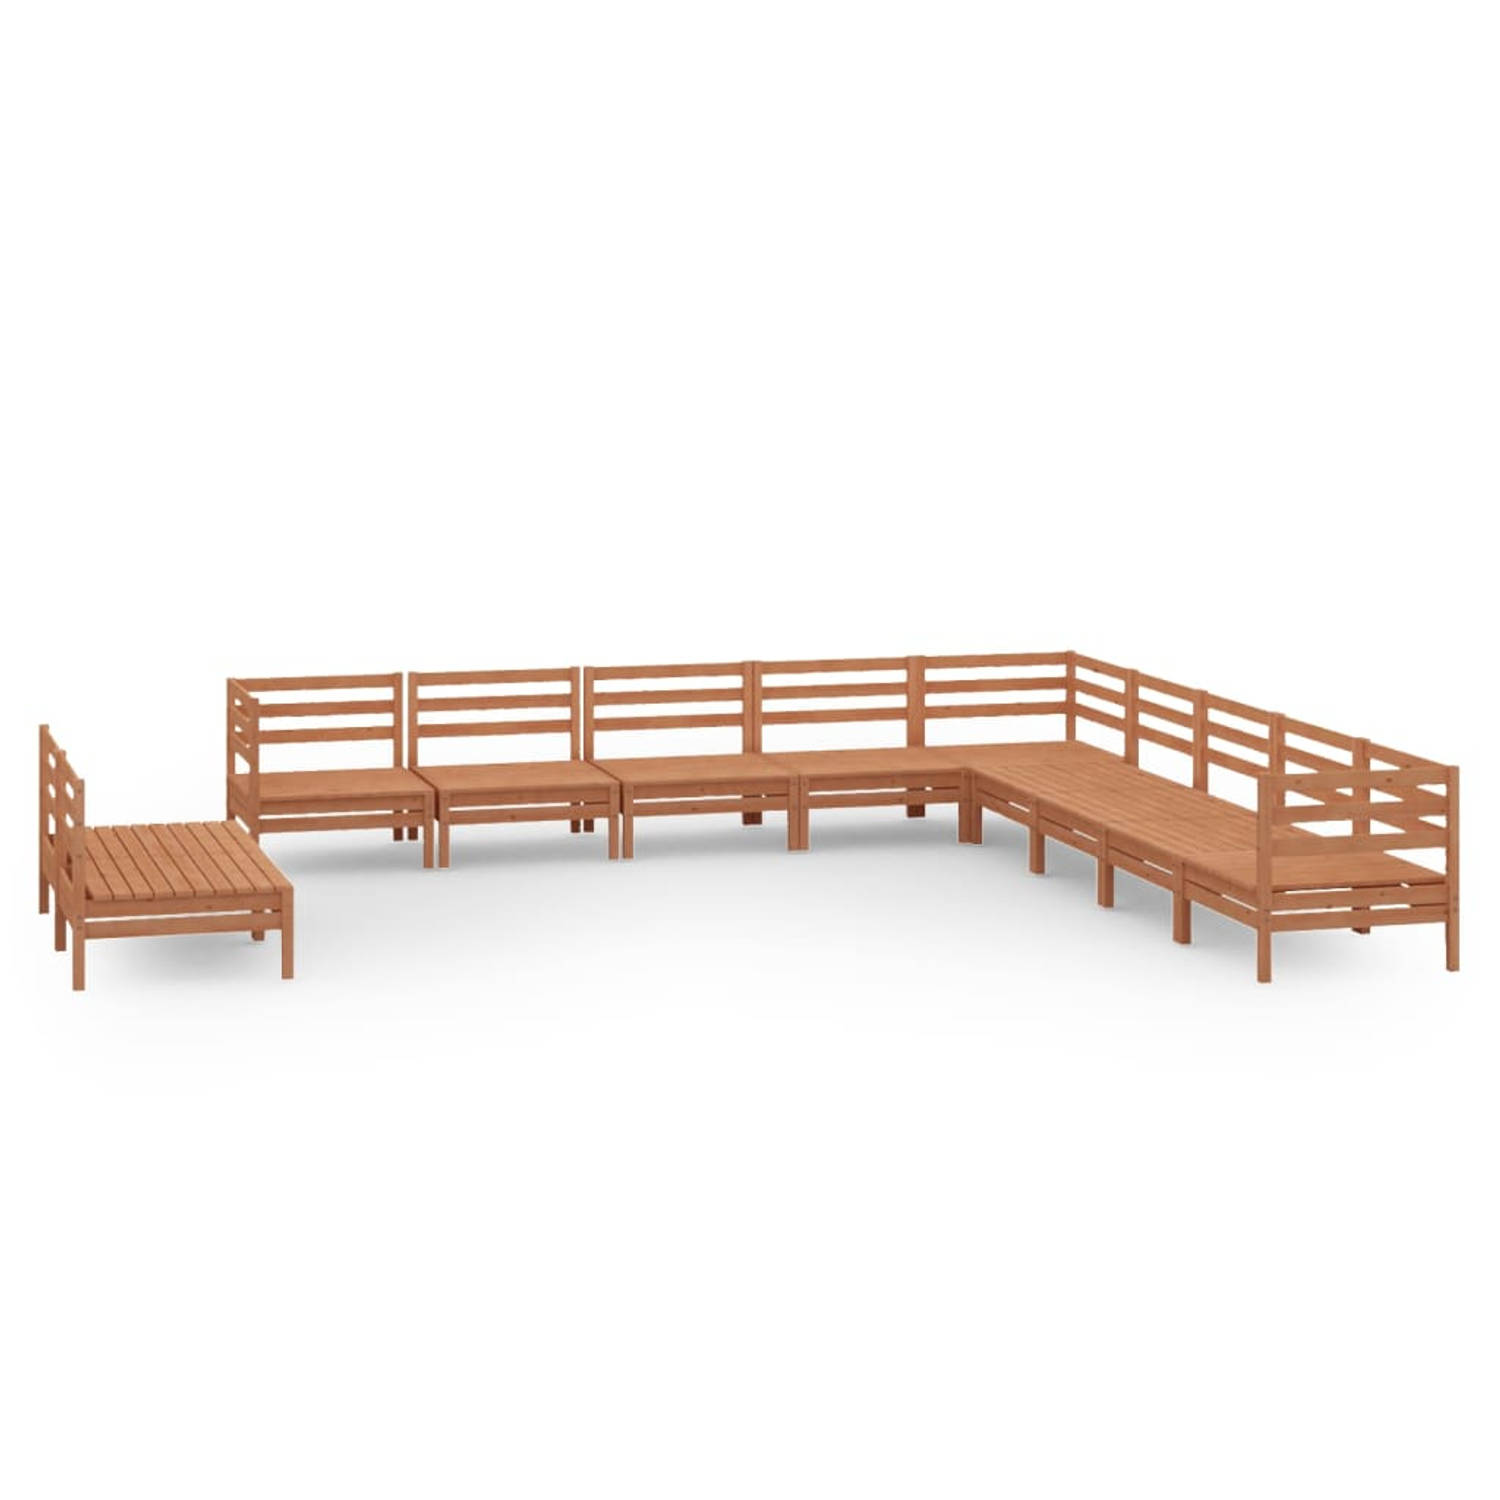 The Living Store 11-delige Loungeset massief grenenhout honingbruin - Tuinset